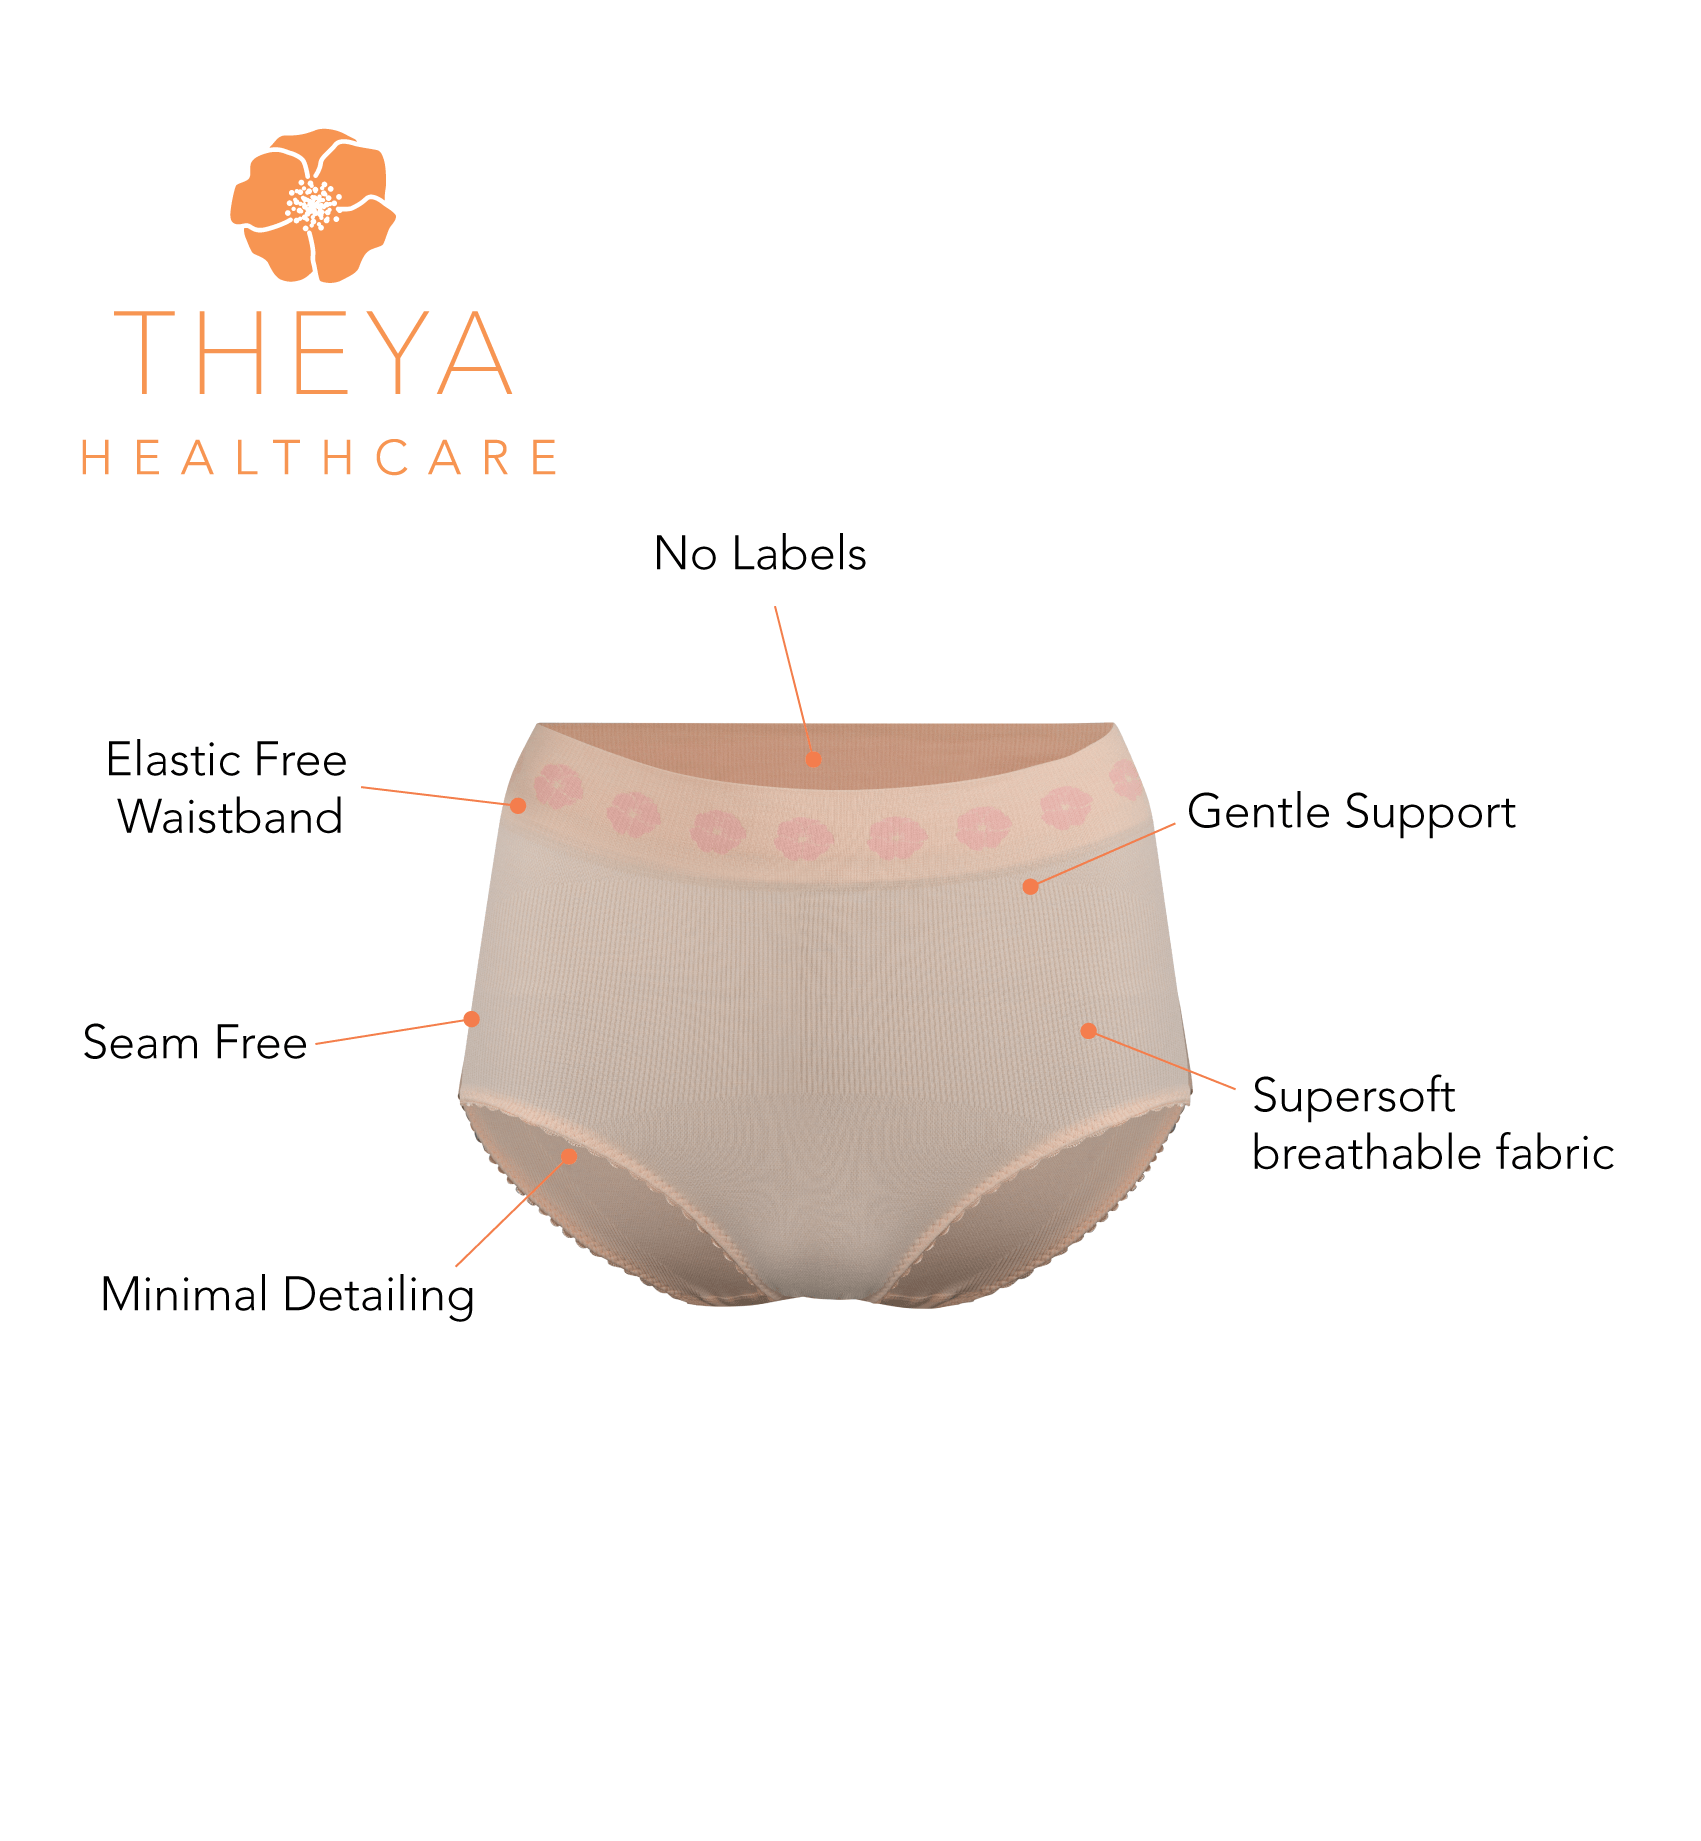 How Support Underwear Help With Recovery From Surgery